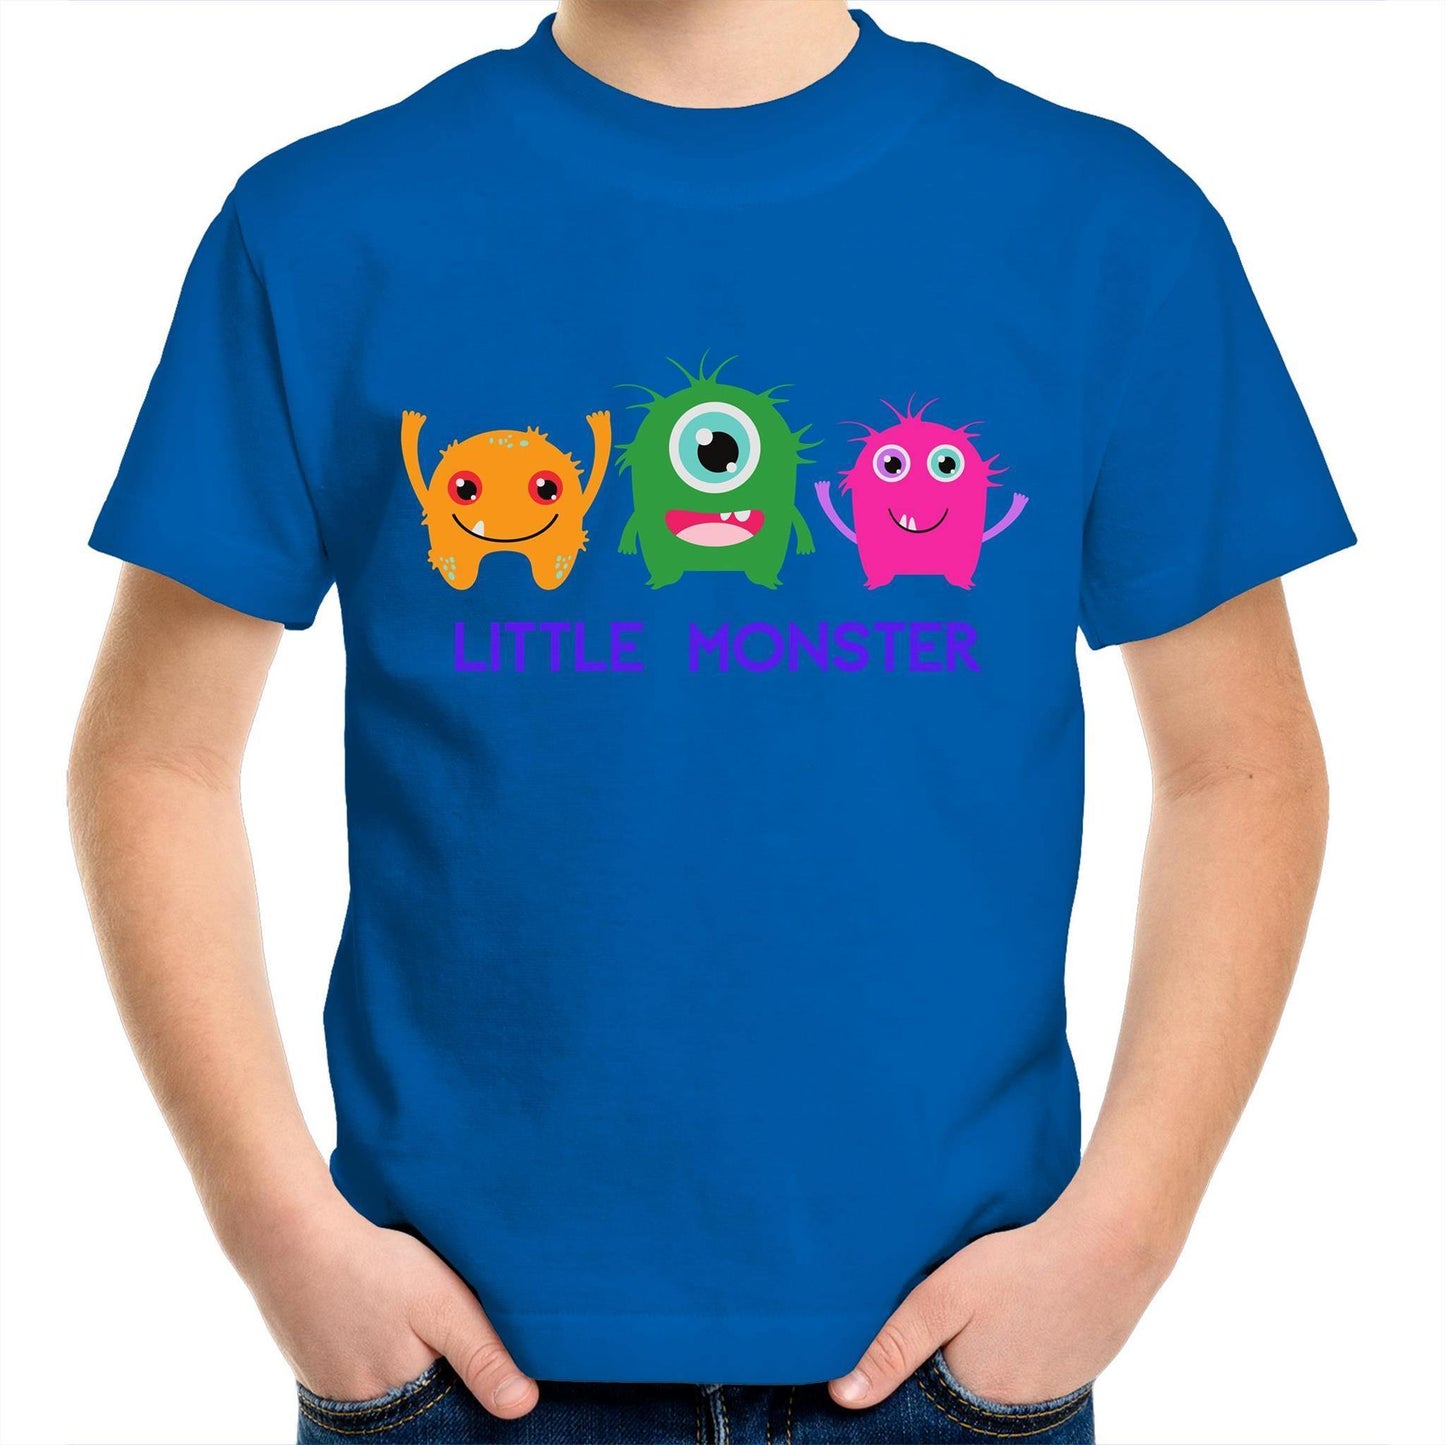 Little Monster - Kids Youth Crew T-Shirt Bright Royal Kids Youth T-shirt Funny Sci Fi